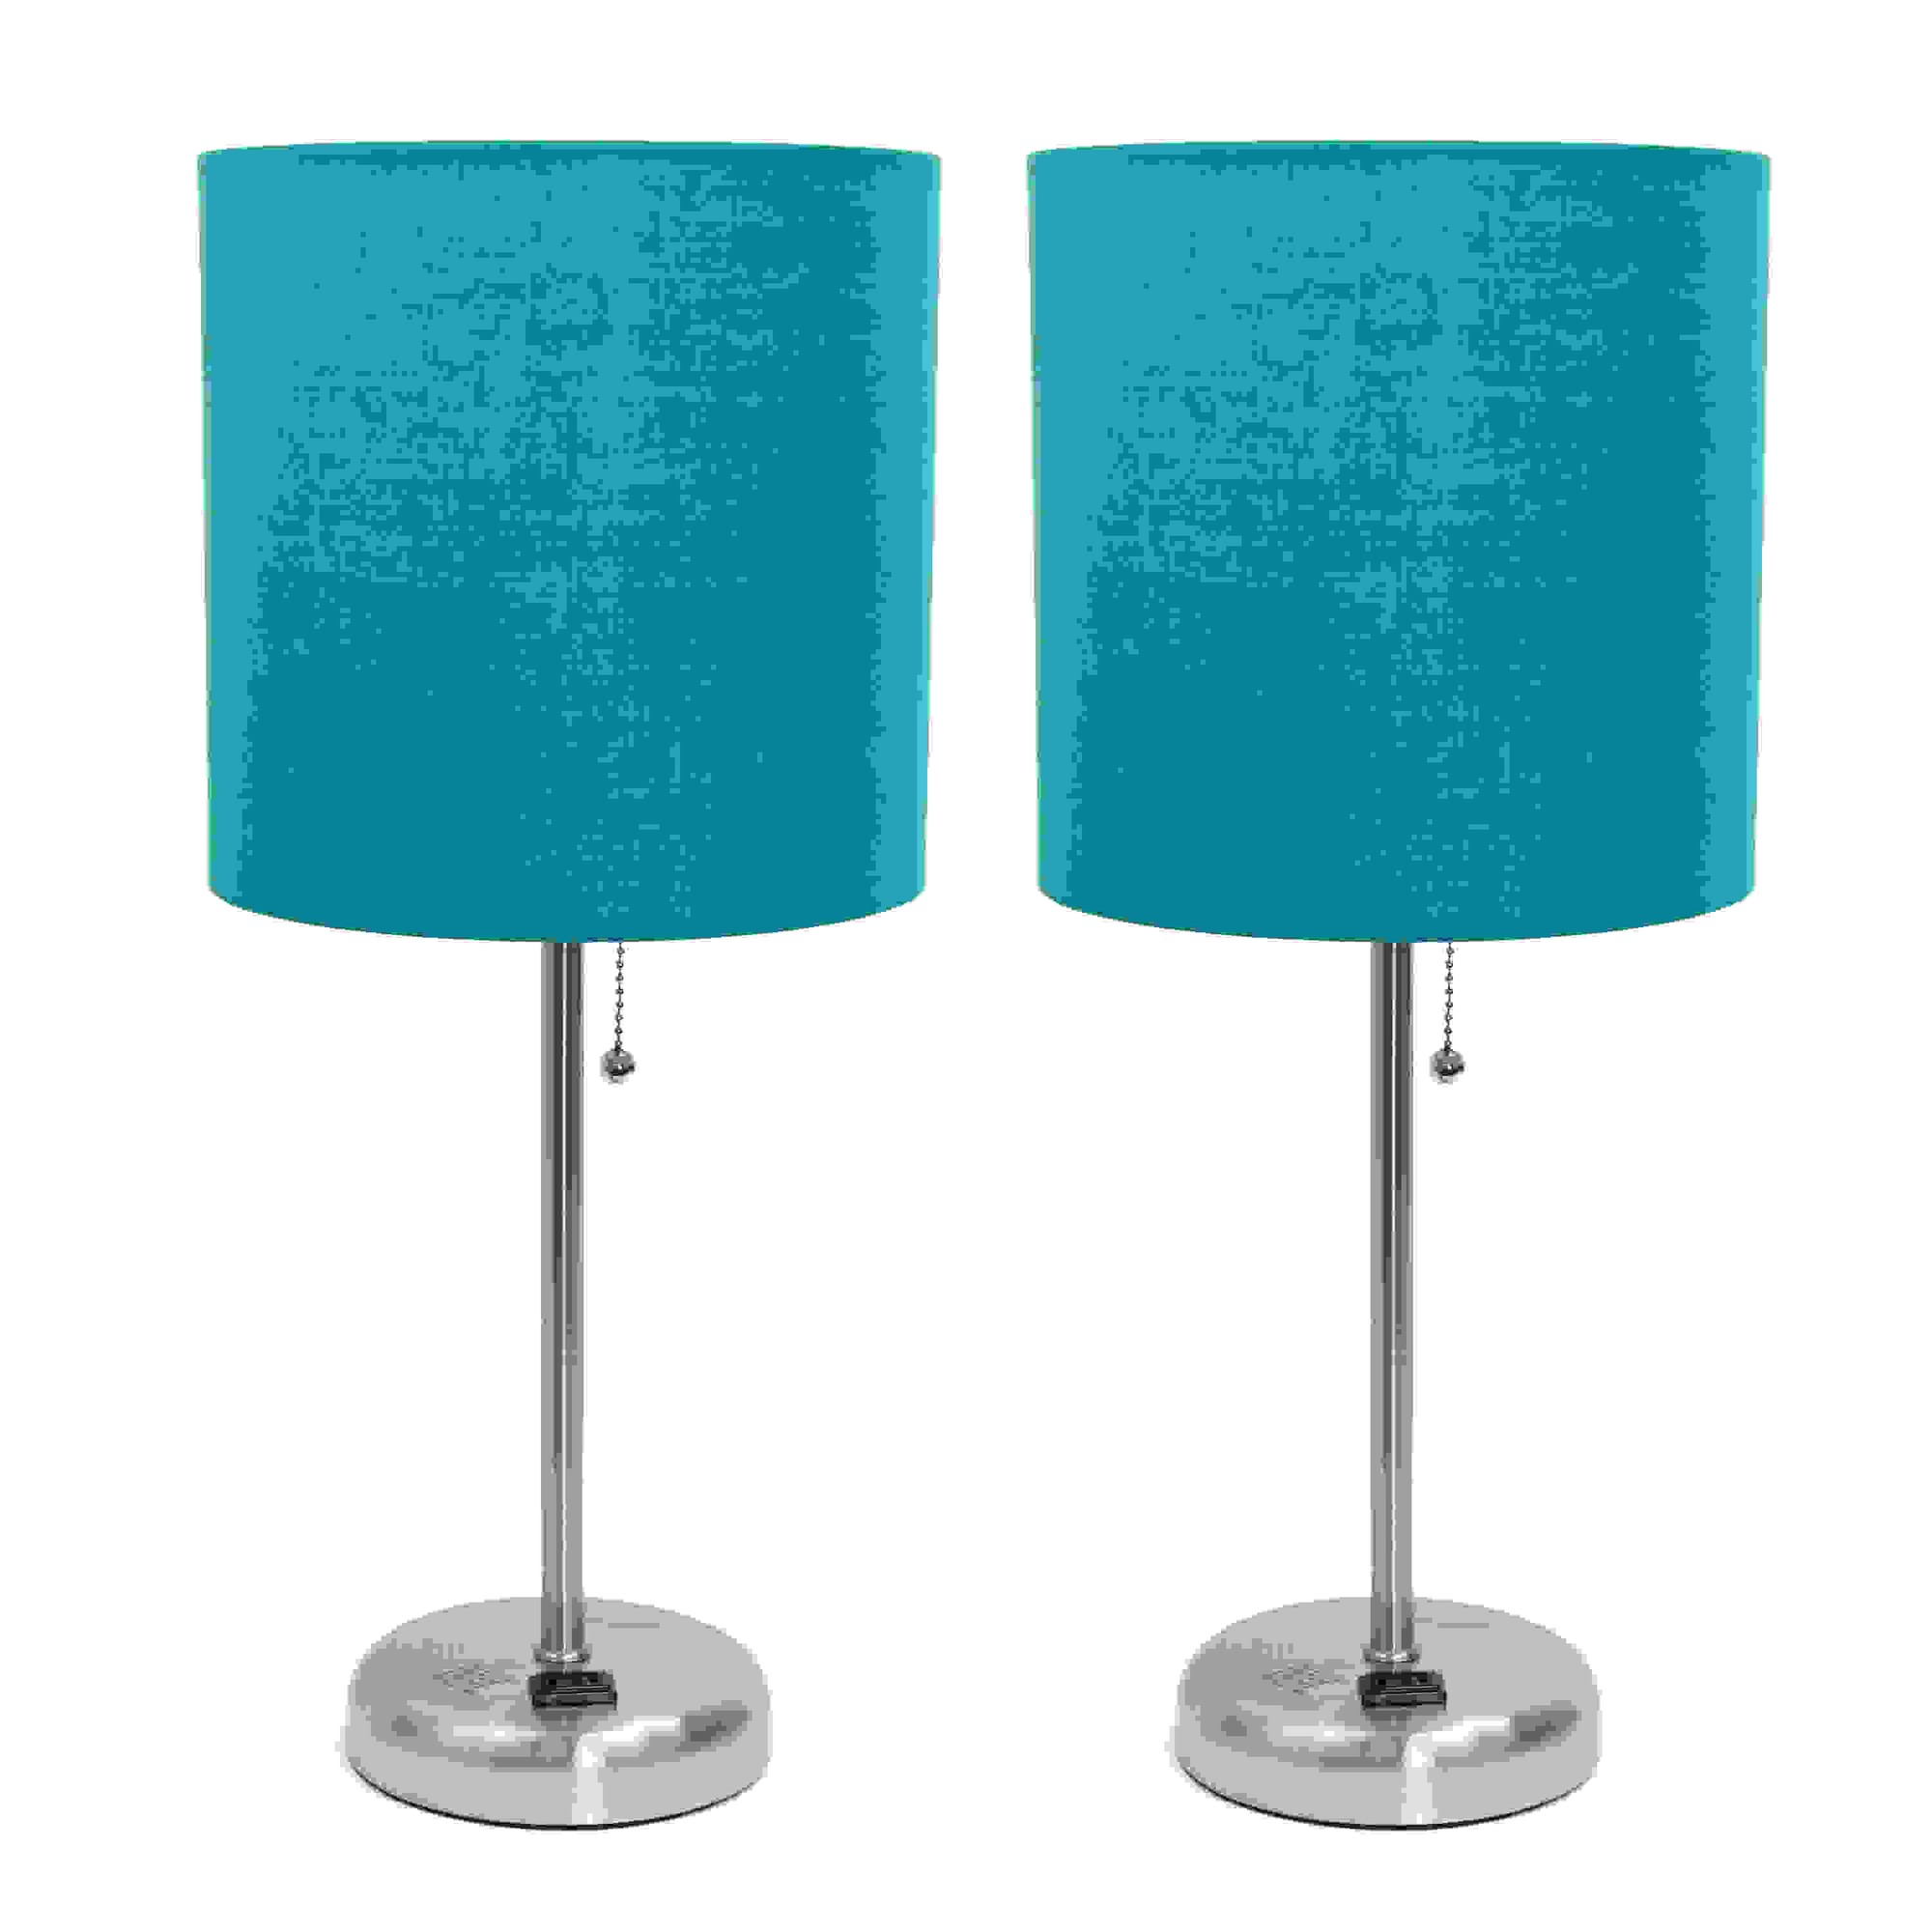 Simple Designs Brushed Steel Stick Lamp with Charging Outlet and Fabric Shade 2 Pack Set, Teal